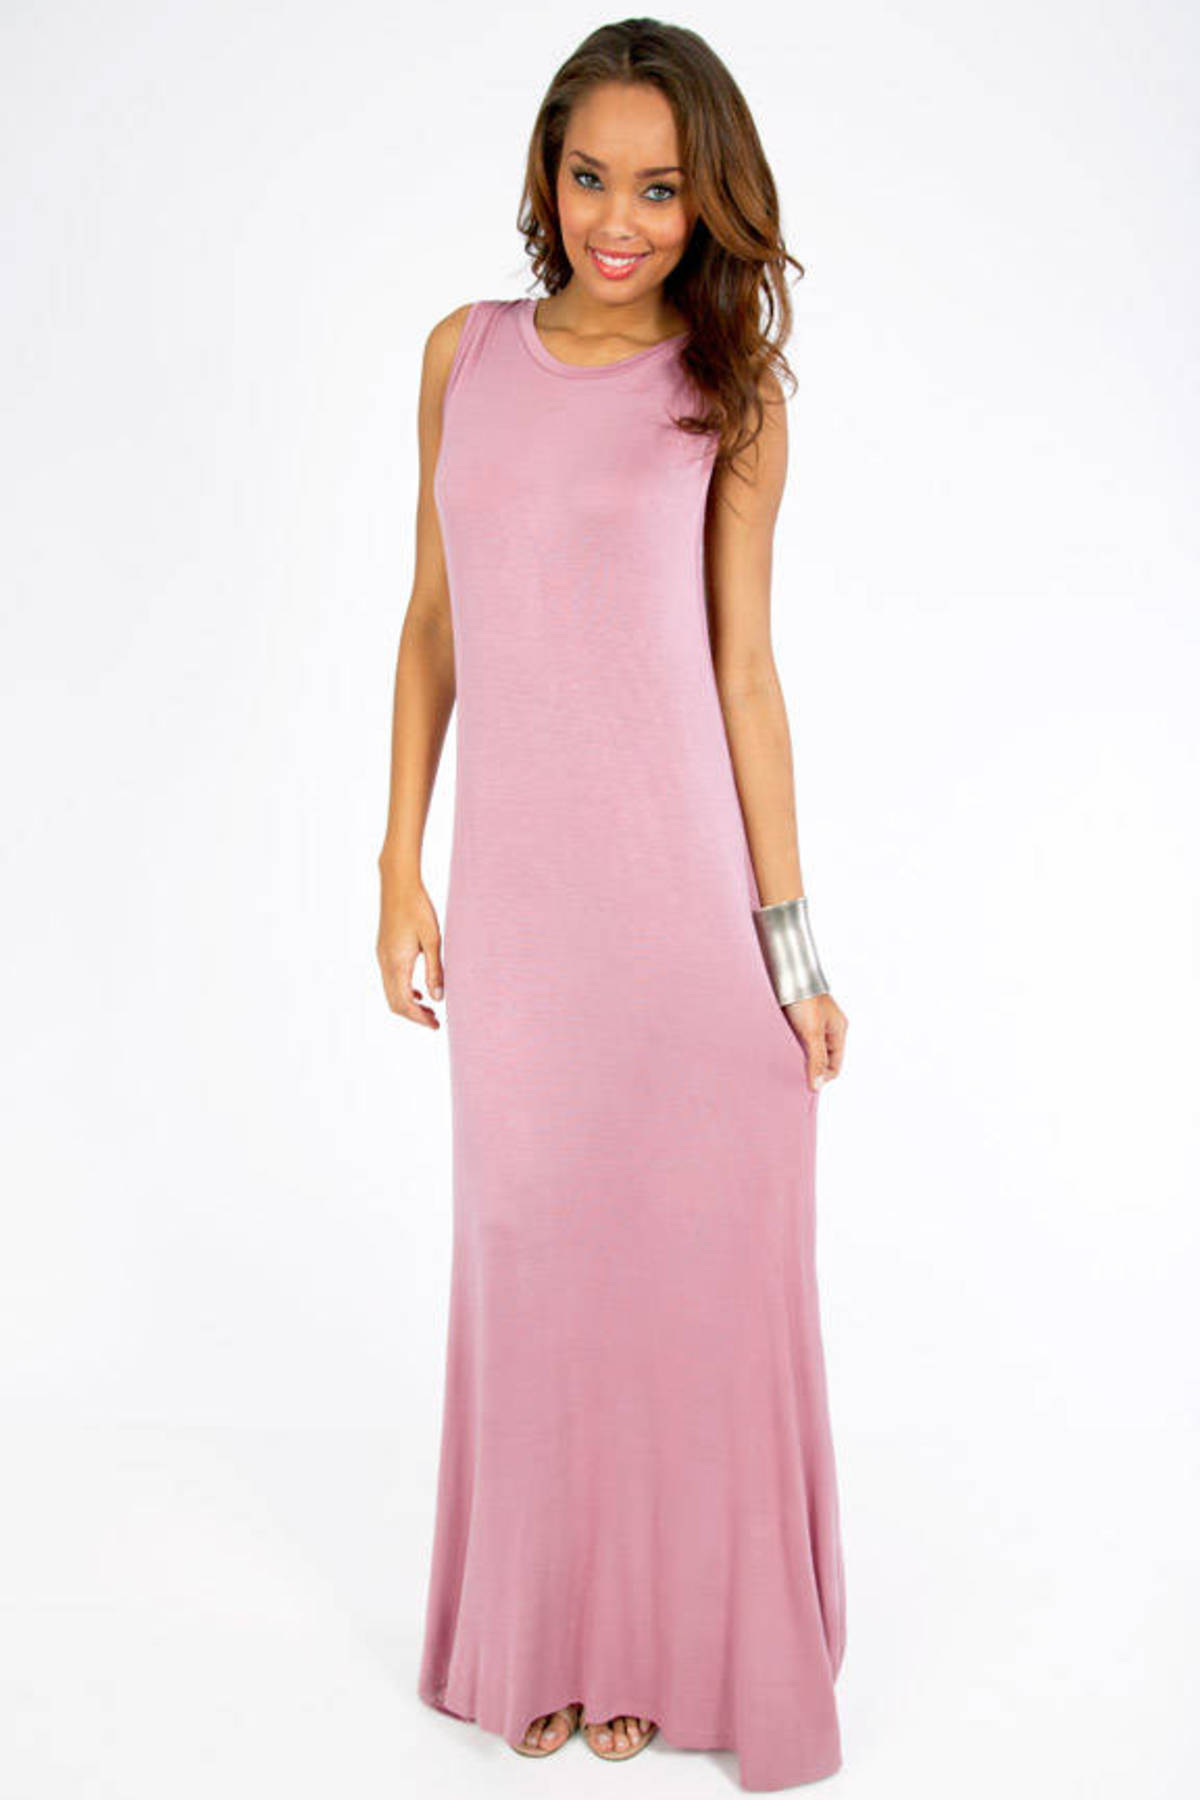 All Twisted Maxi Dress 2 in Dusty Rose - $42 | Tobi US